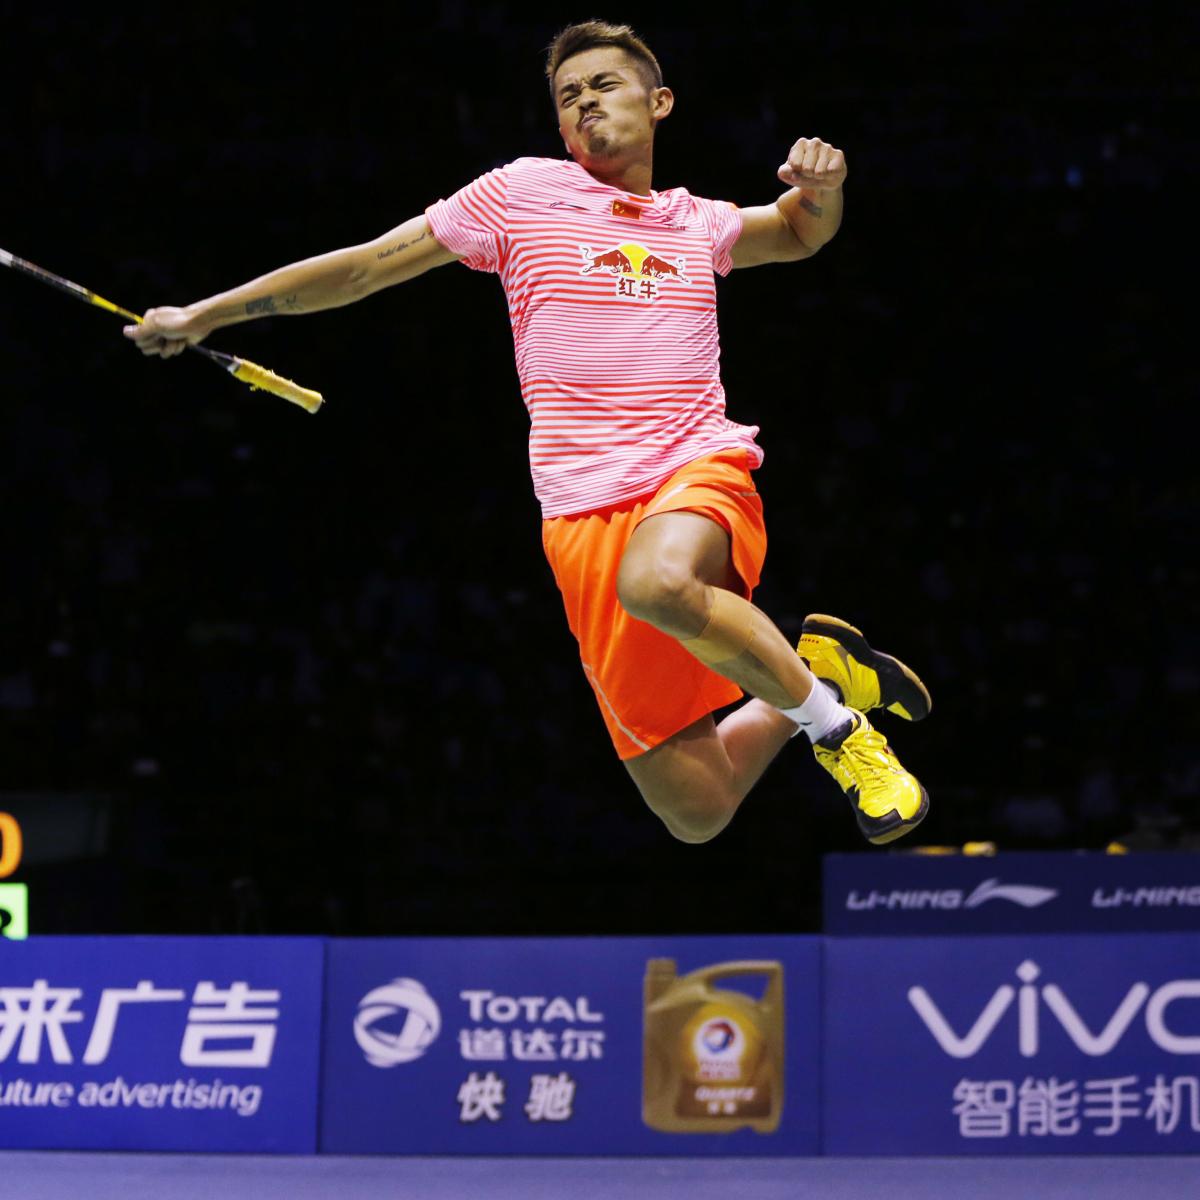 Sudirman Cup Results 2015 Final Score from China vs. Japan News